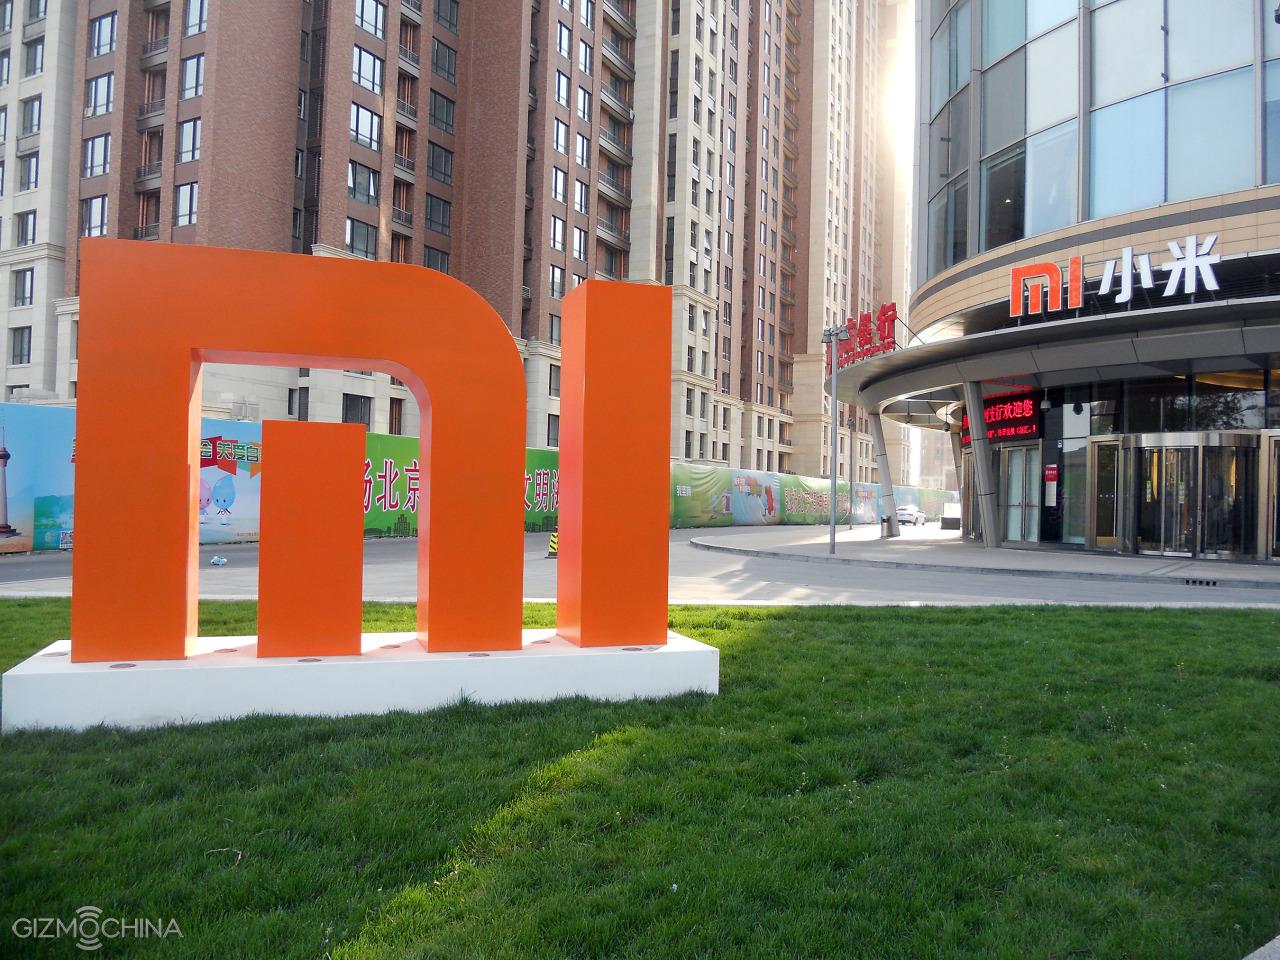 Xiaomi Group acquires remaining 50.09% stake in Zimi for $205 million